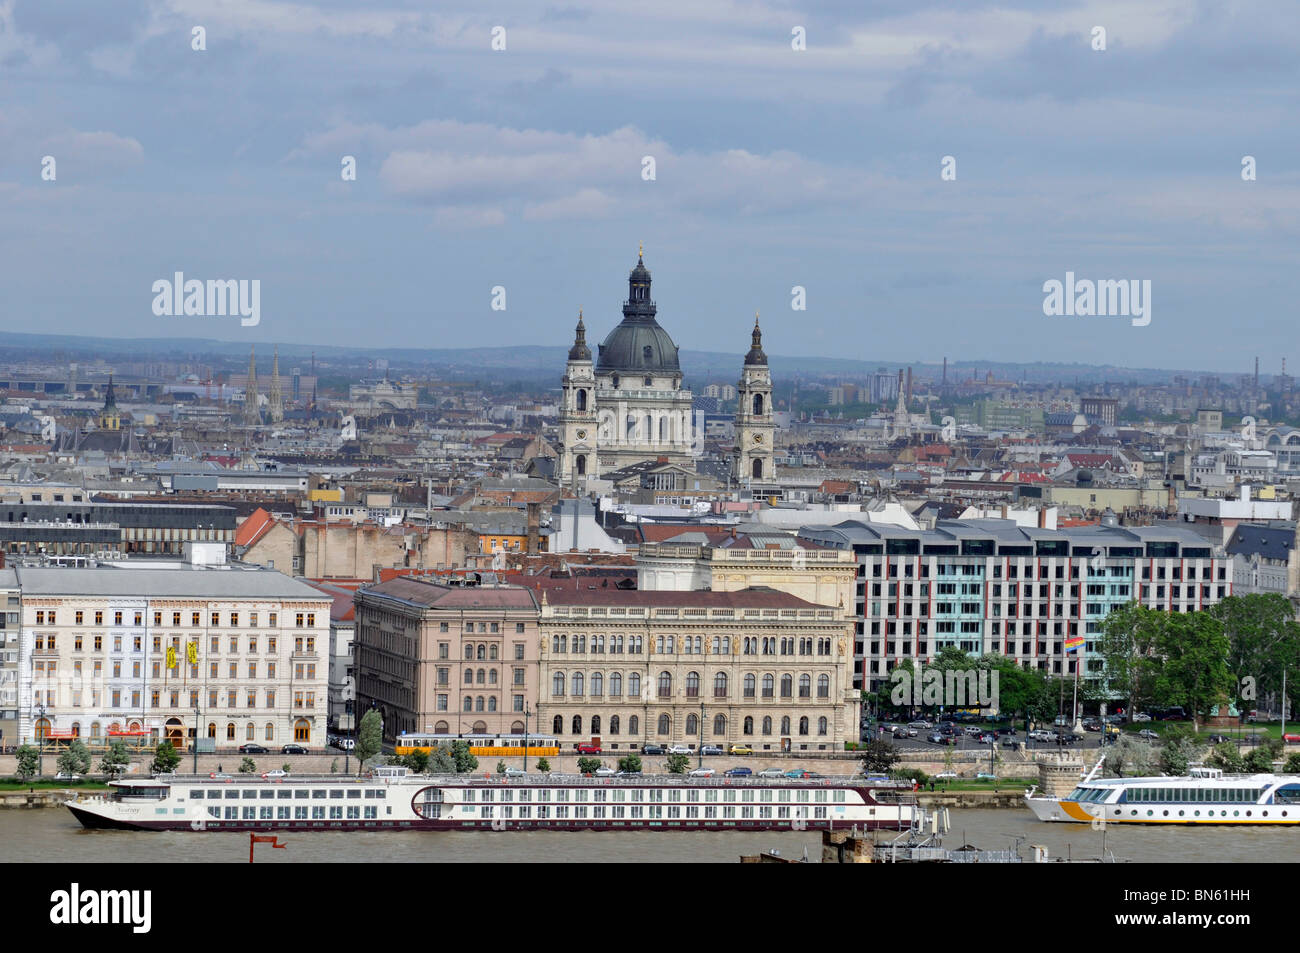 Panorama of Pest with ship on Danube river in front from Buda, Budapest, the capital of Hungary, Europe Stock Photo